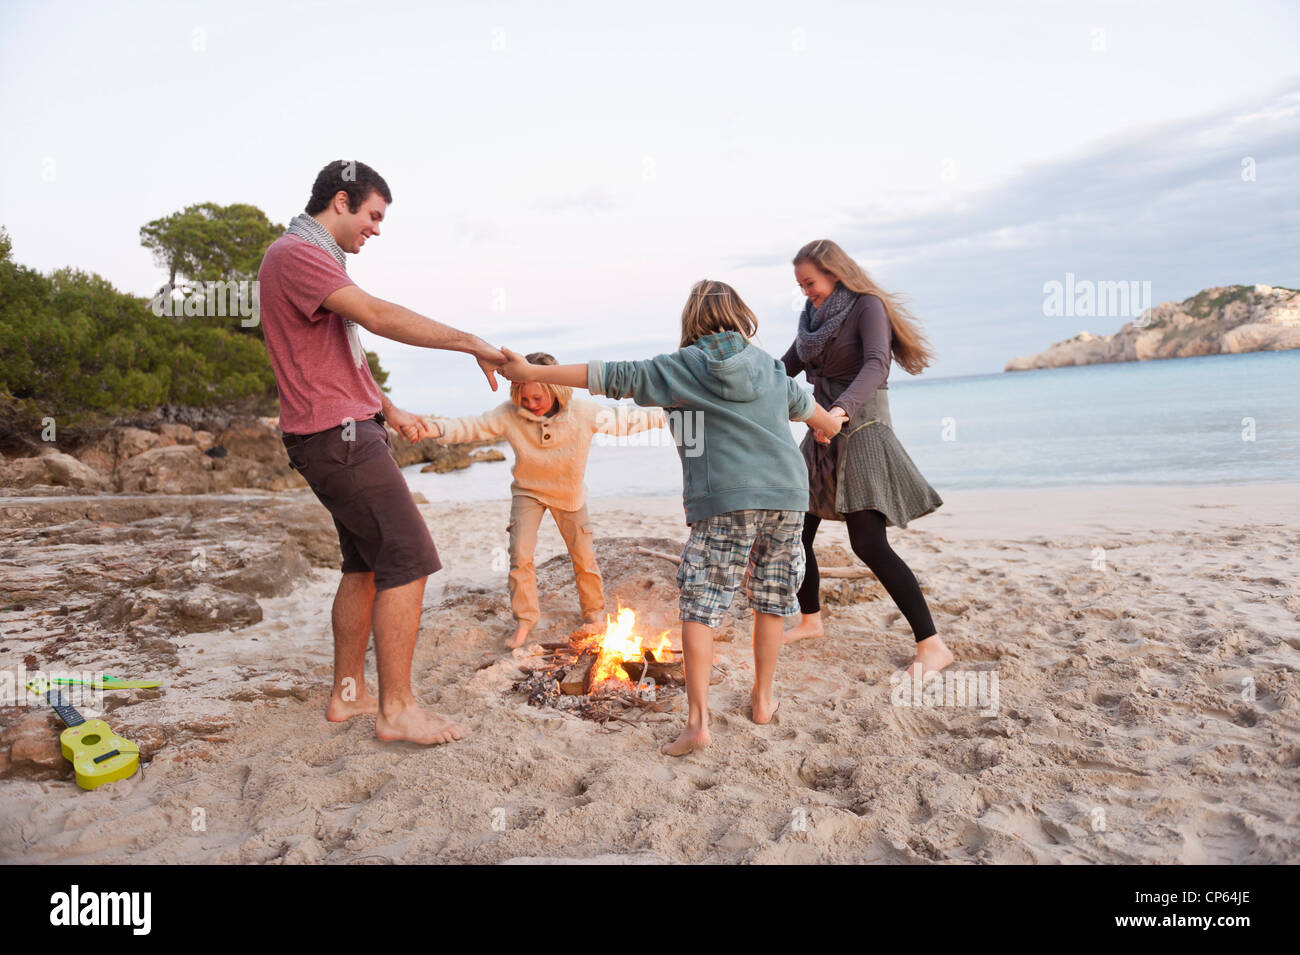 Spain, Mallorca, Friends dancing at camp fire on beach Stock Photo